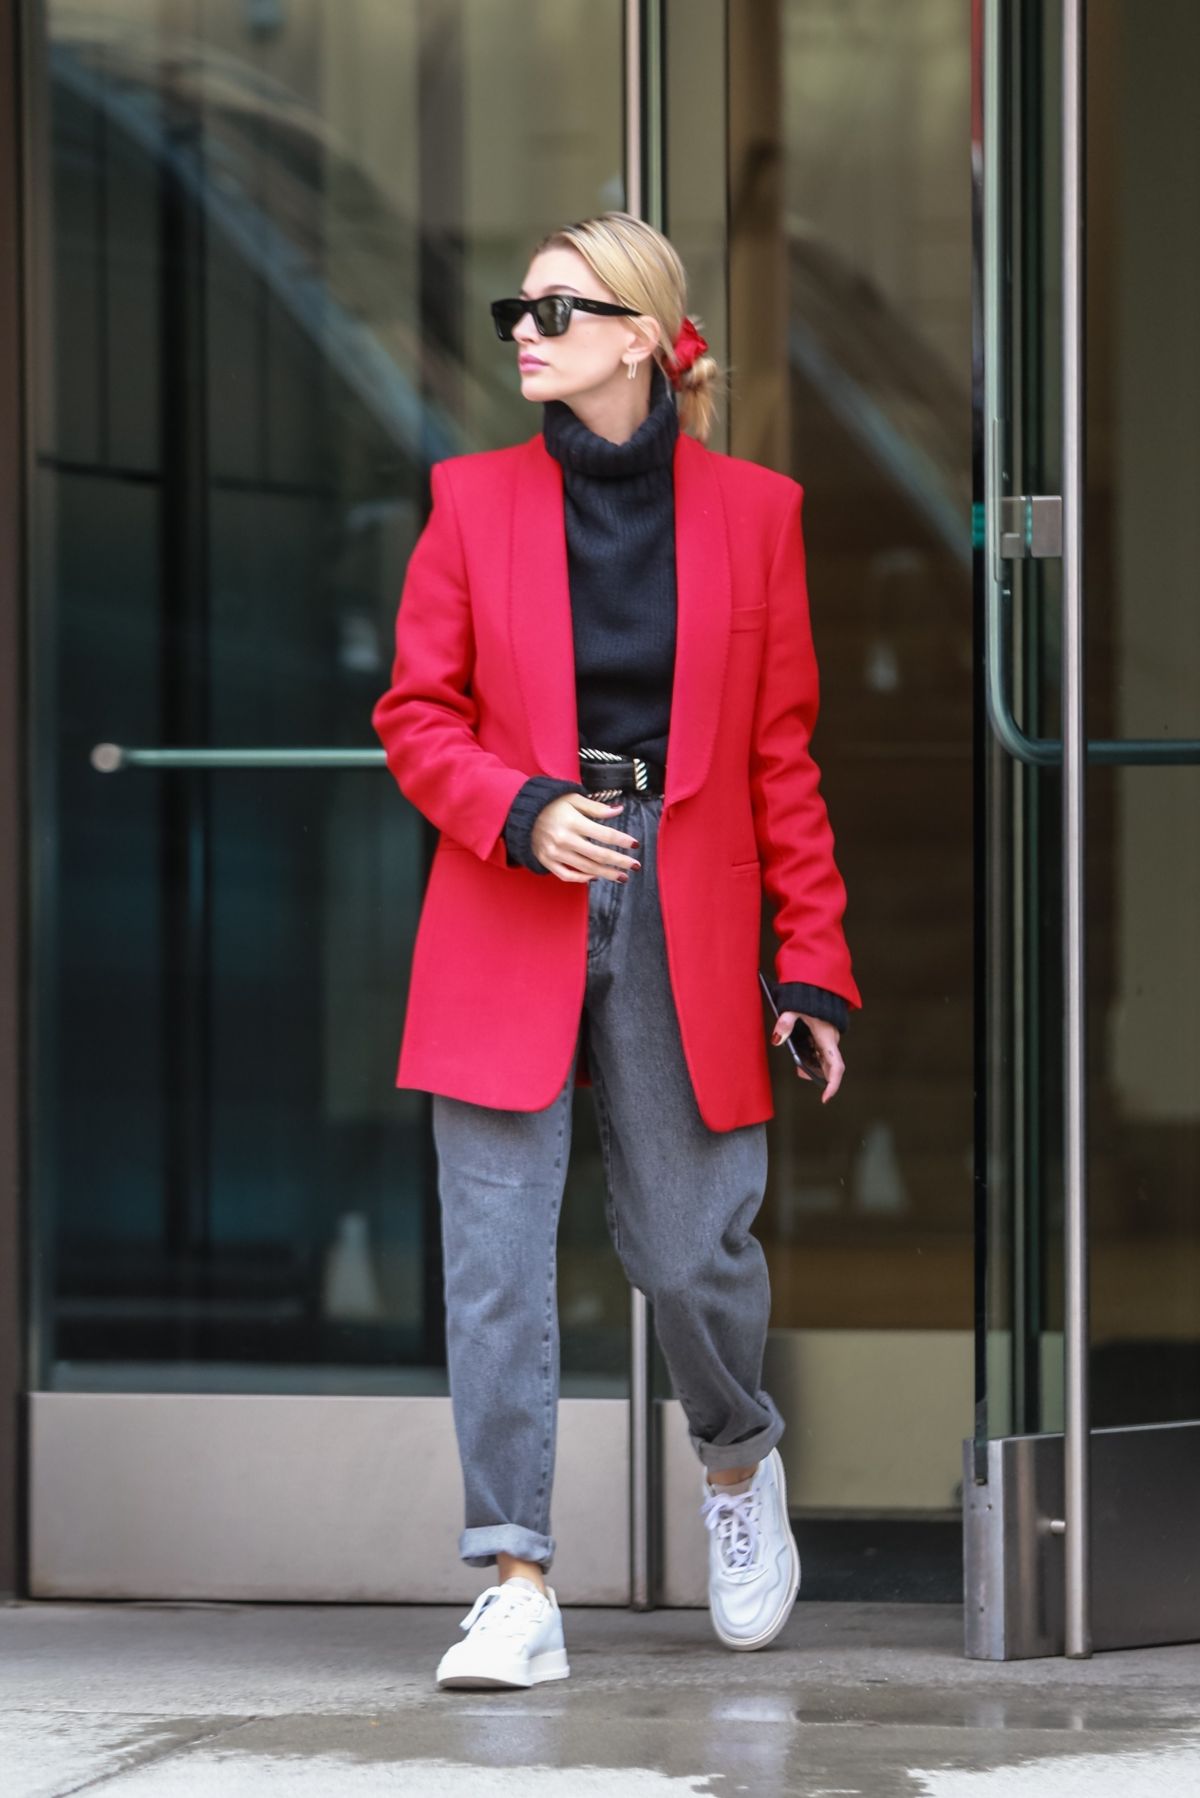 hailey-bieber-out-and-about-in-new-york-03-08-2019-4.jpg